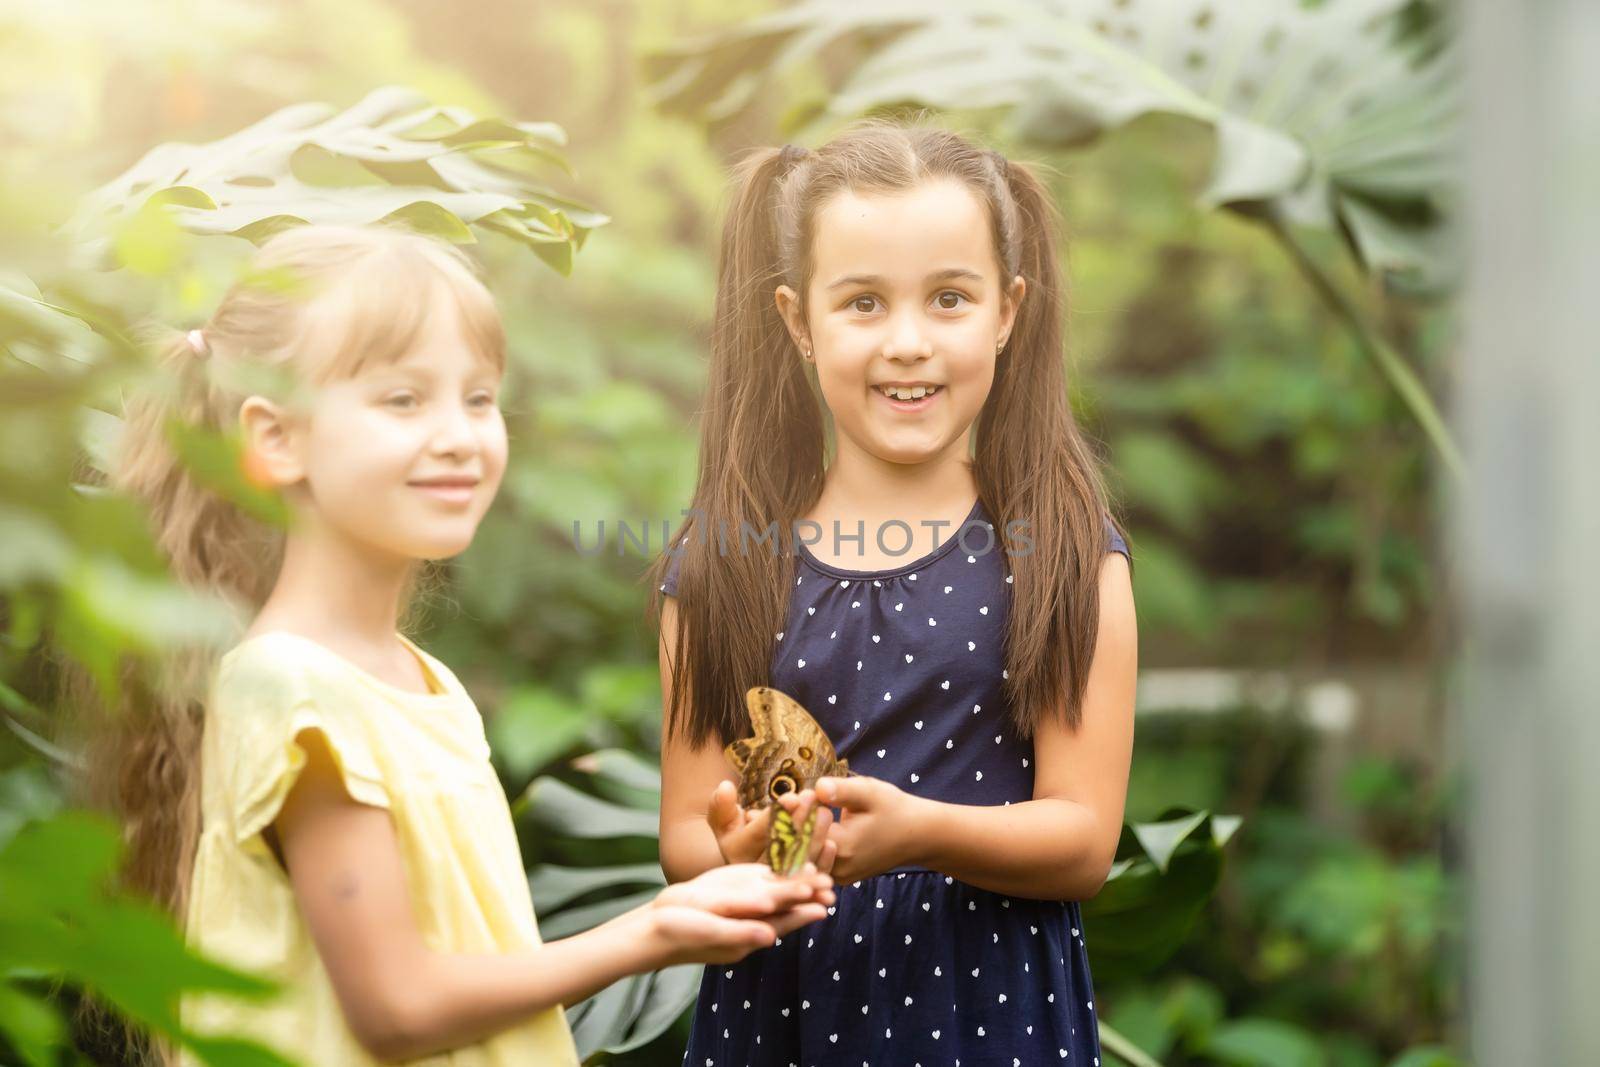 two little girls with butterflies in a greenhouse by Andelov13